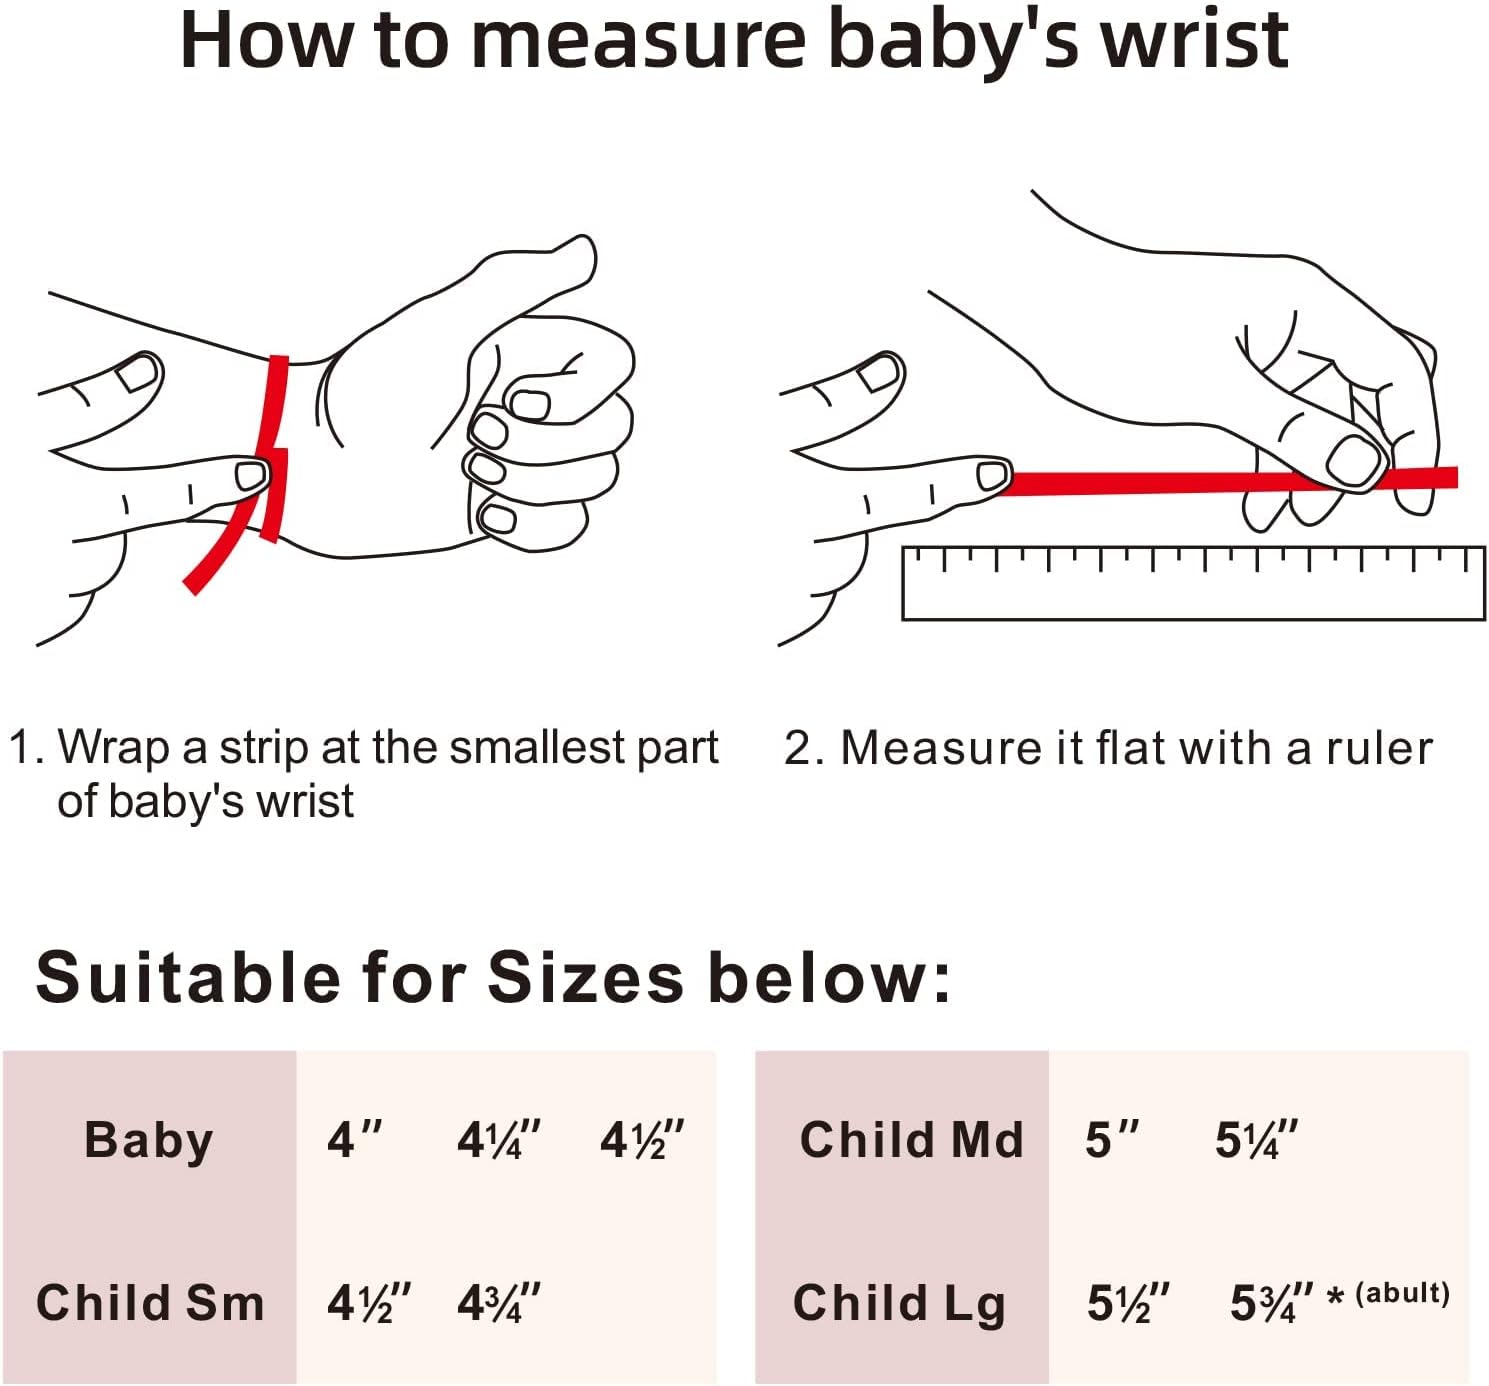 Thumb Sucking Stop - 1-3 Years Old Baby - Adjustable Thumb Guard for Thumb Sucking Silicone Thumb Sucking Treatment Kit for 3-36 Months Baby, Maximum for 1.95”-1.5" Wide Wrist